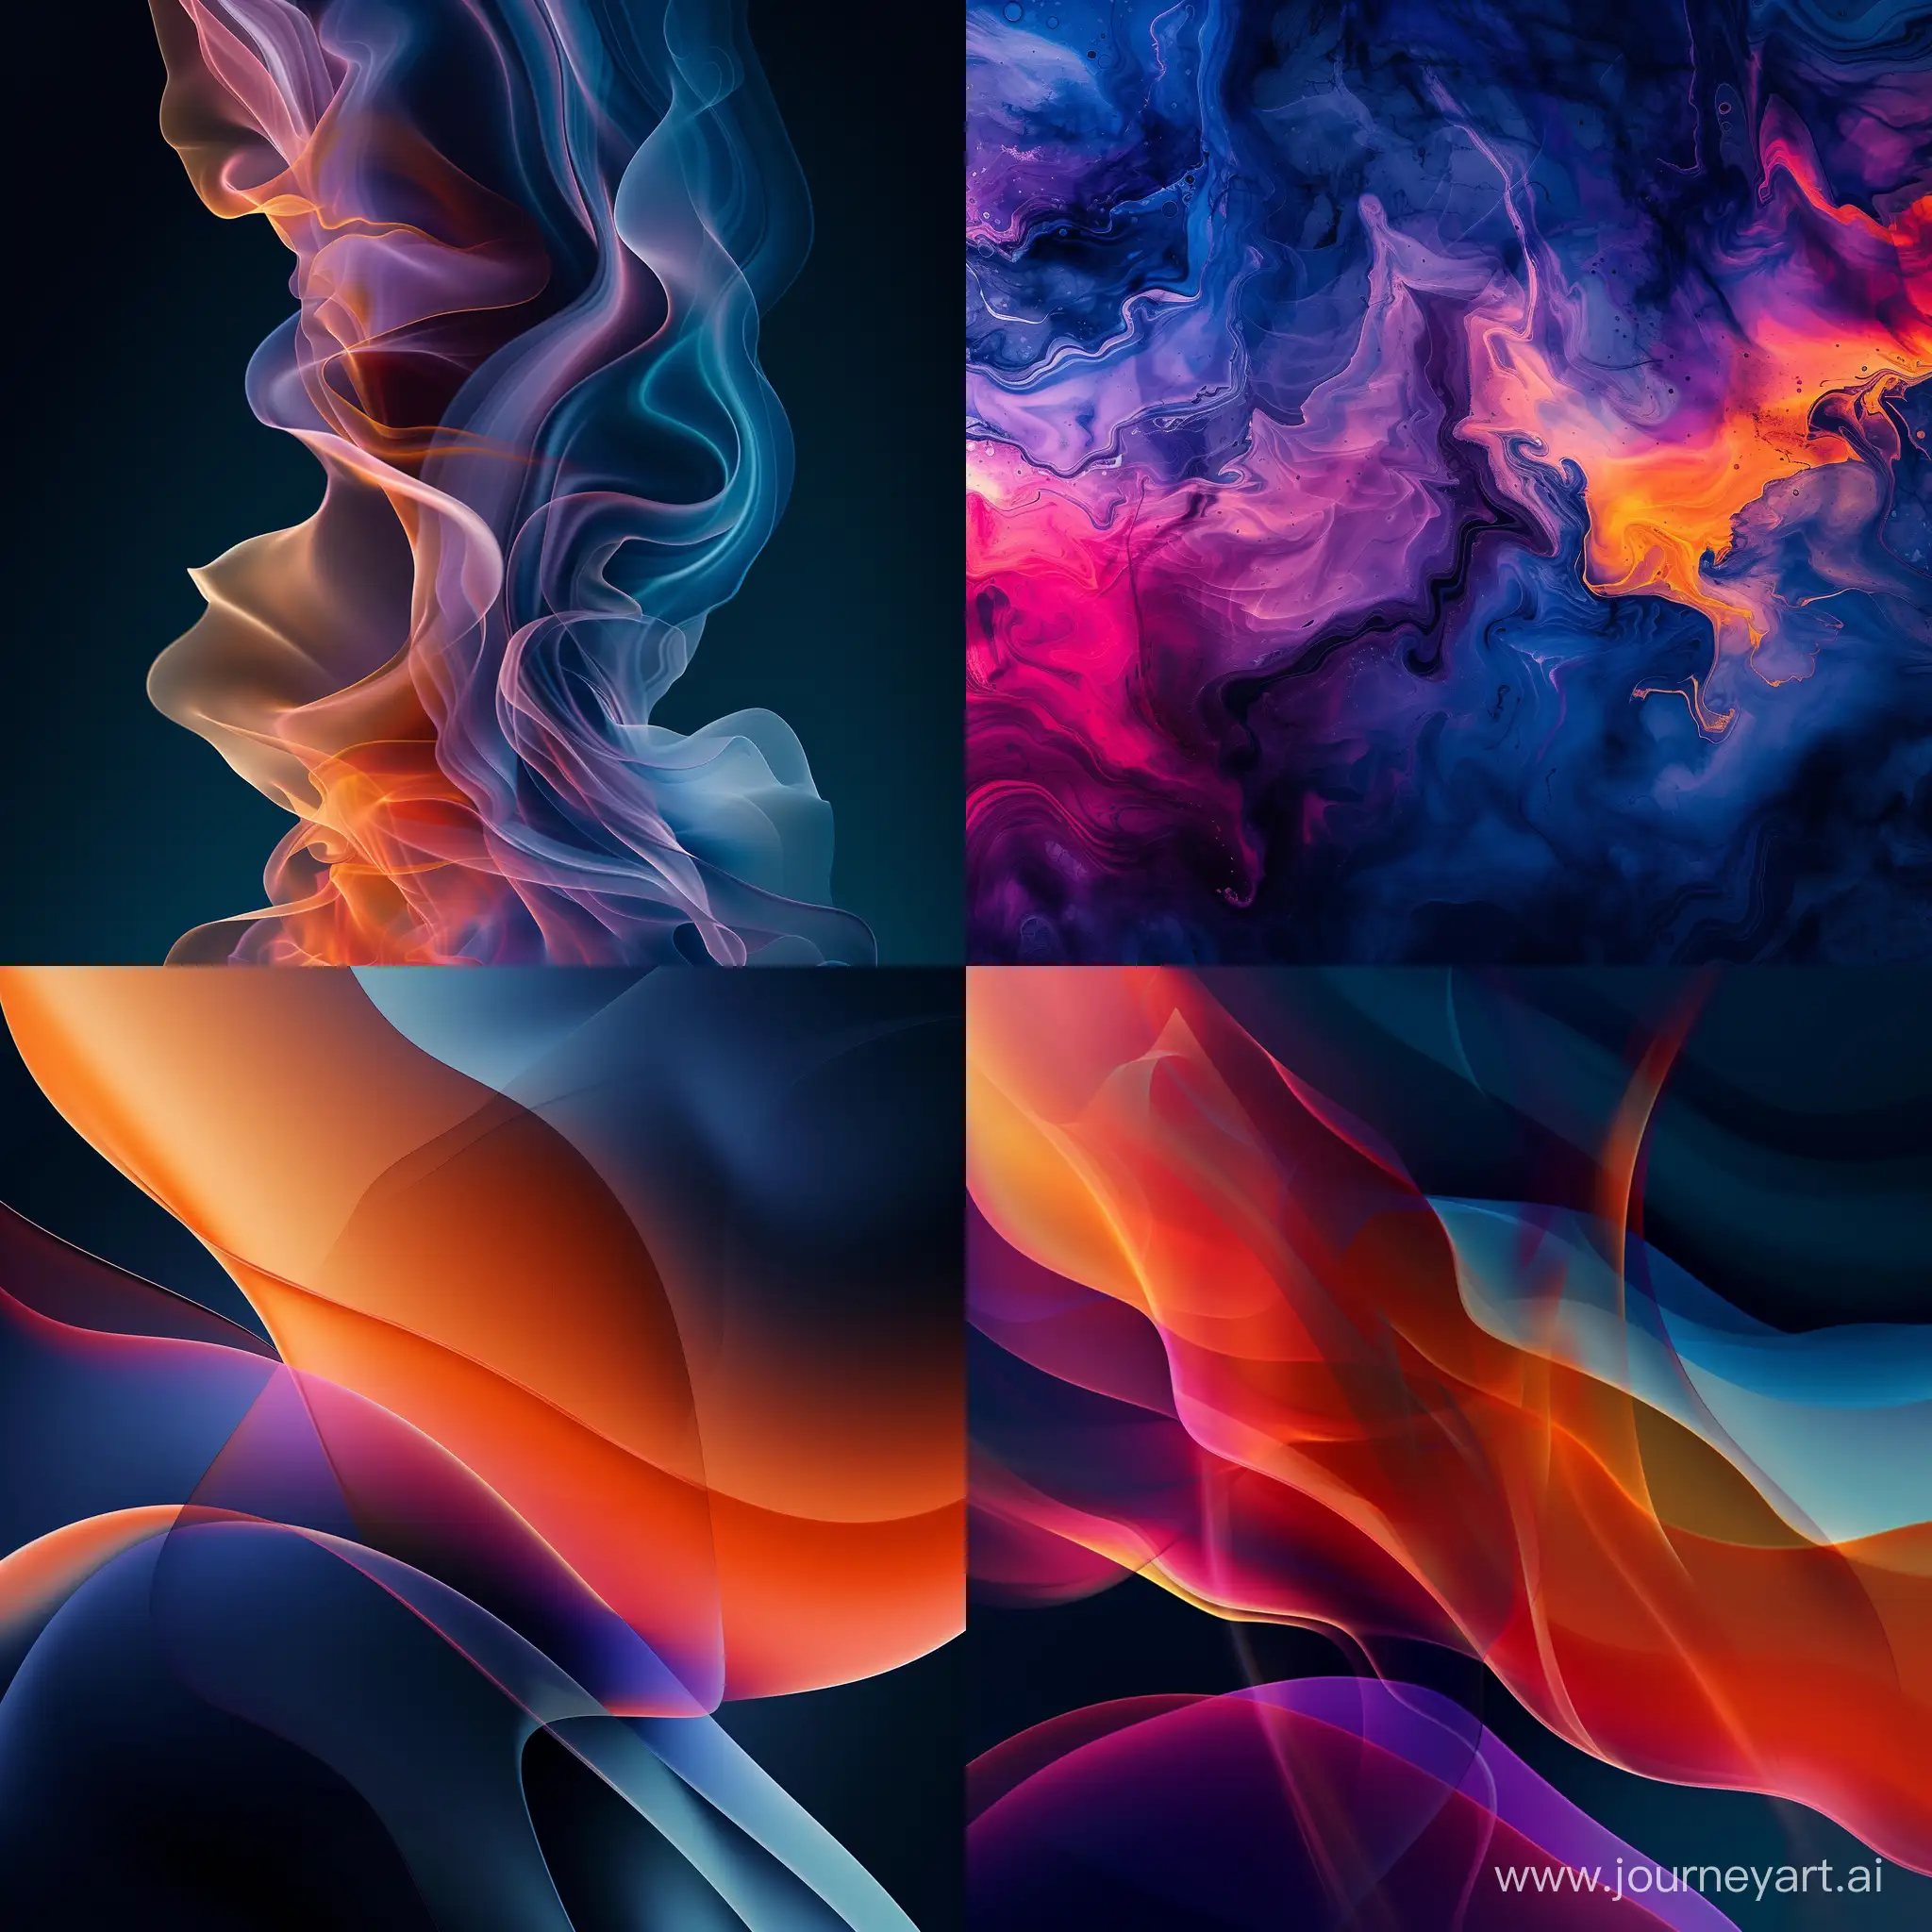 Abstract-iOS-Wallpaper-with-Geometric-Patterns-Versatile-11-Aspect-Ratio